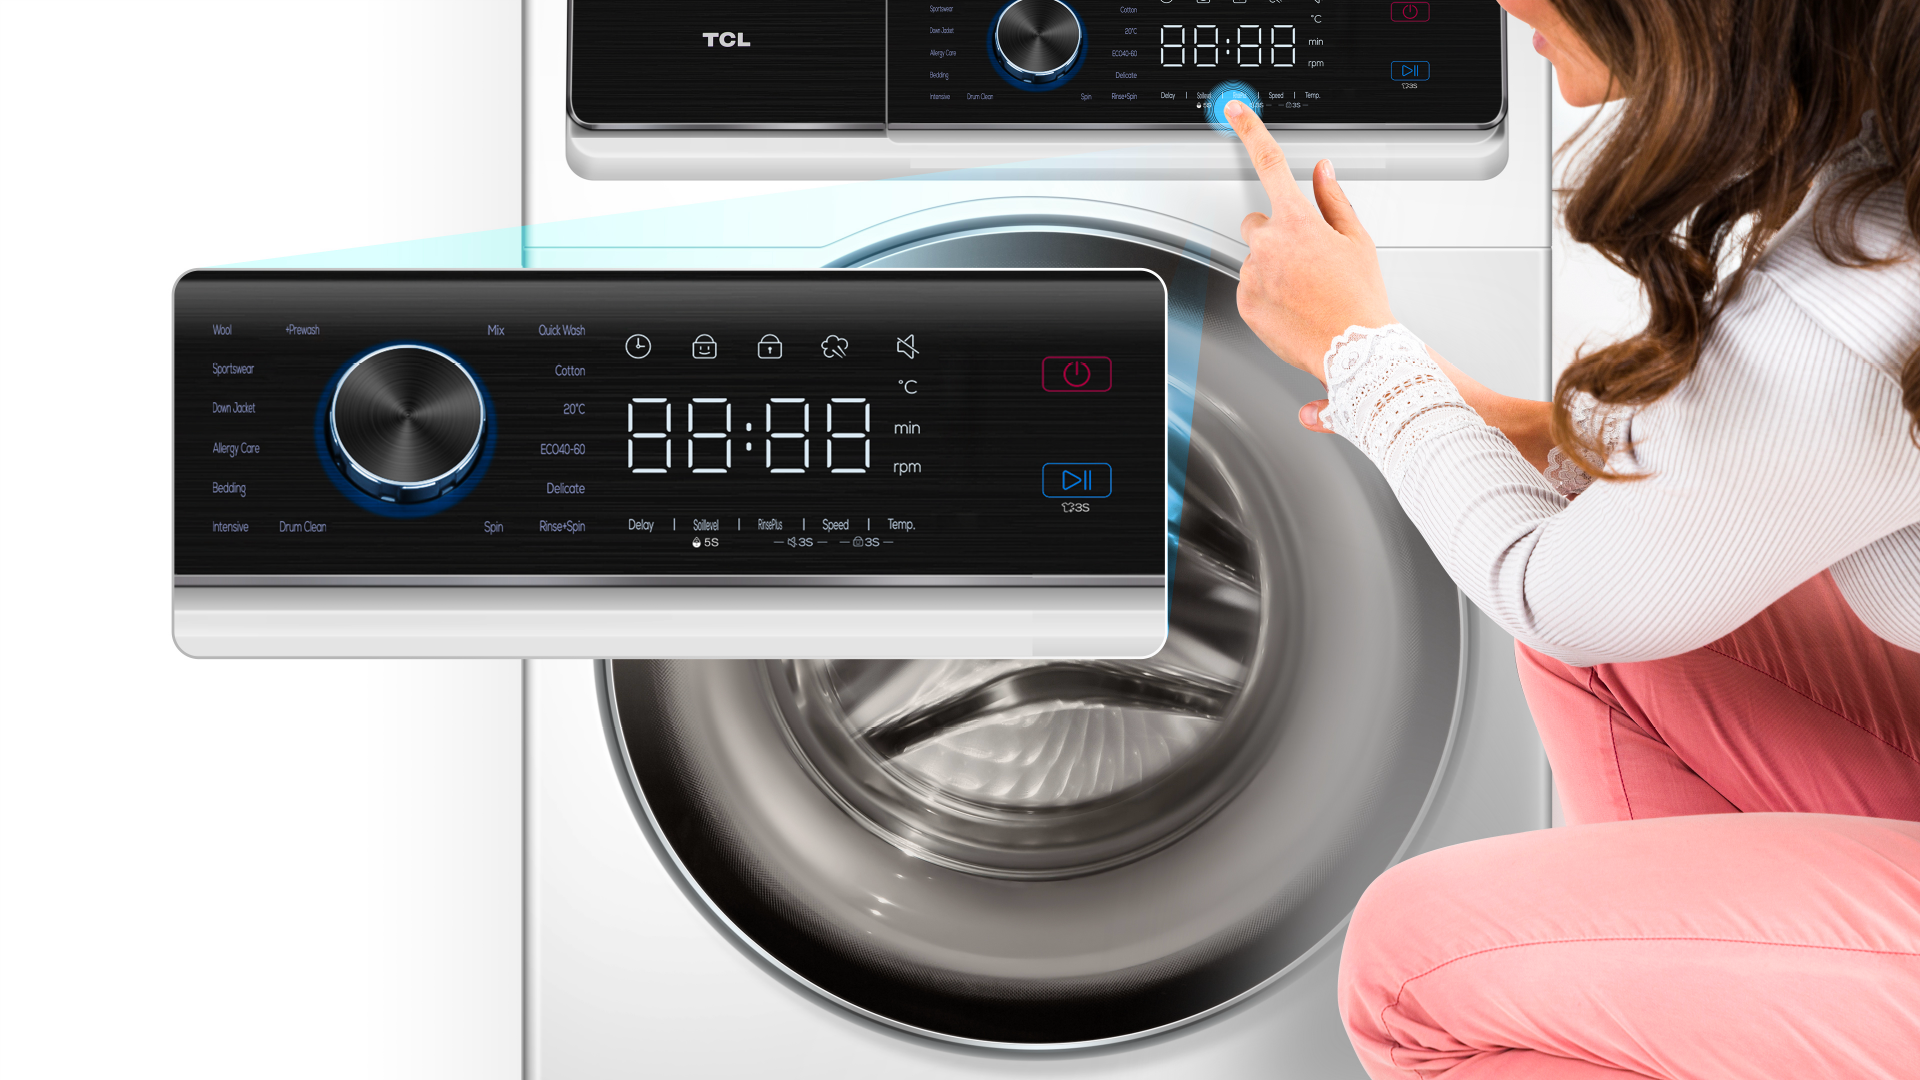 TCL Washing Machine fp0824wc0 Touch Control Display